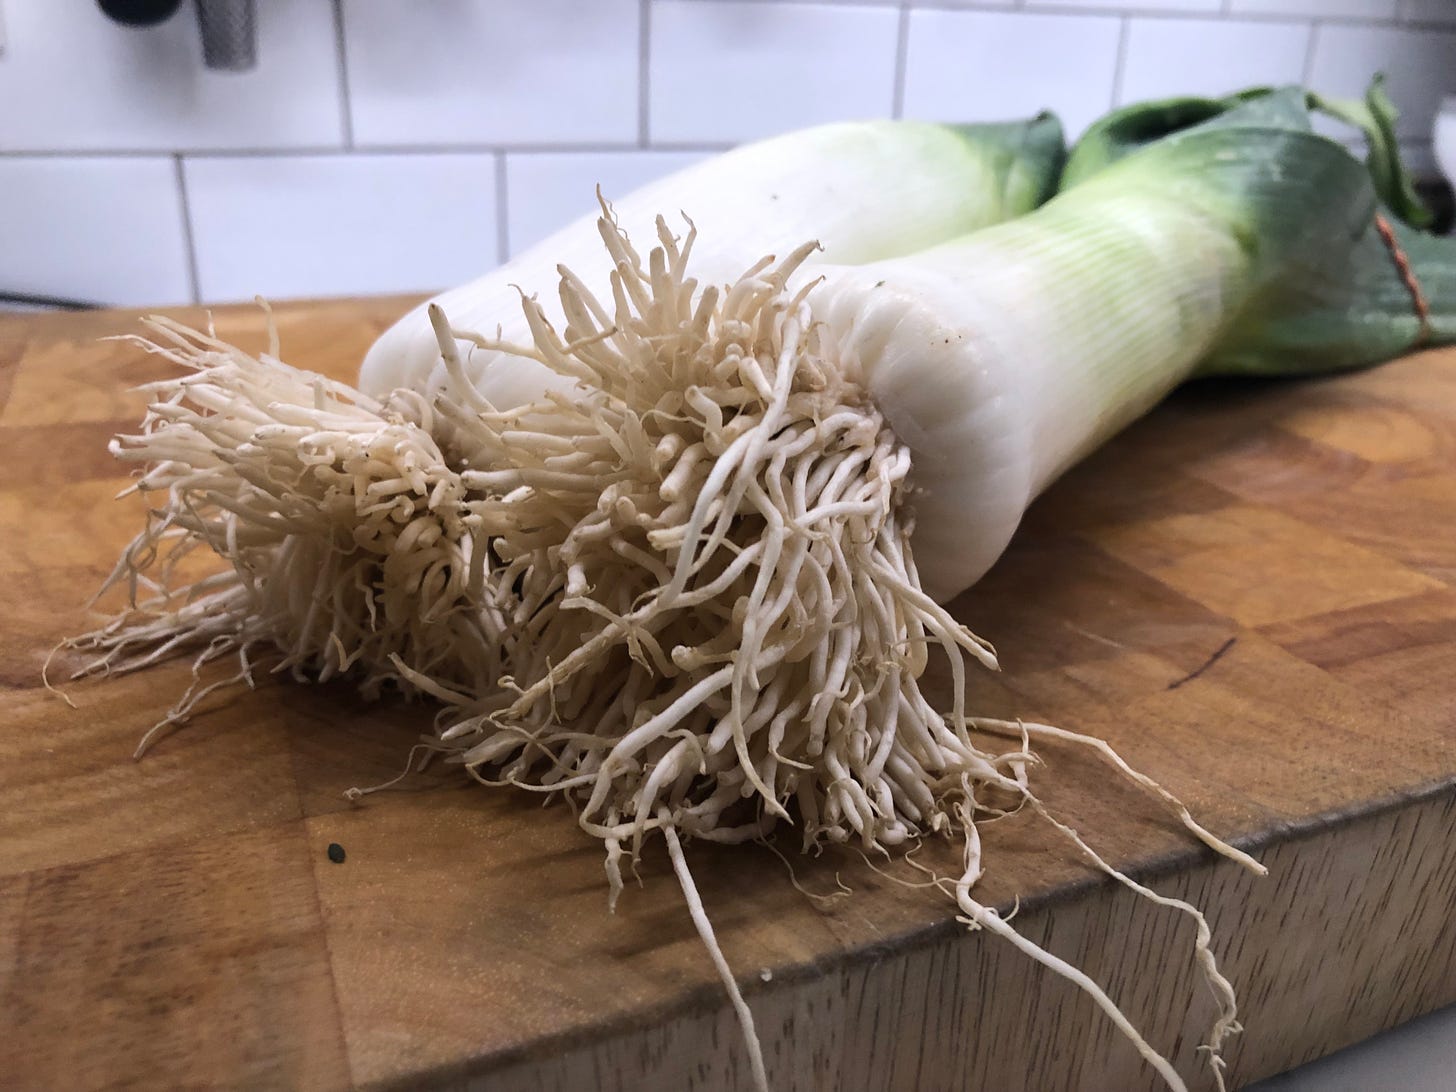 Two very large leeks on a cutting board